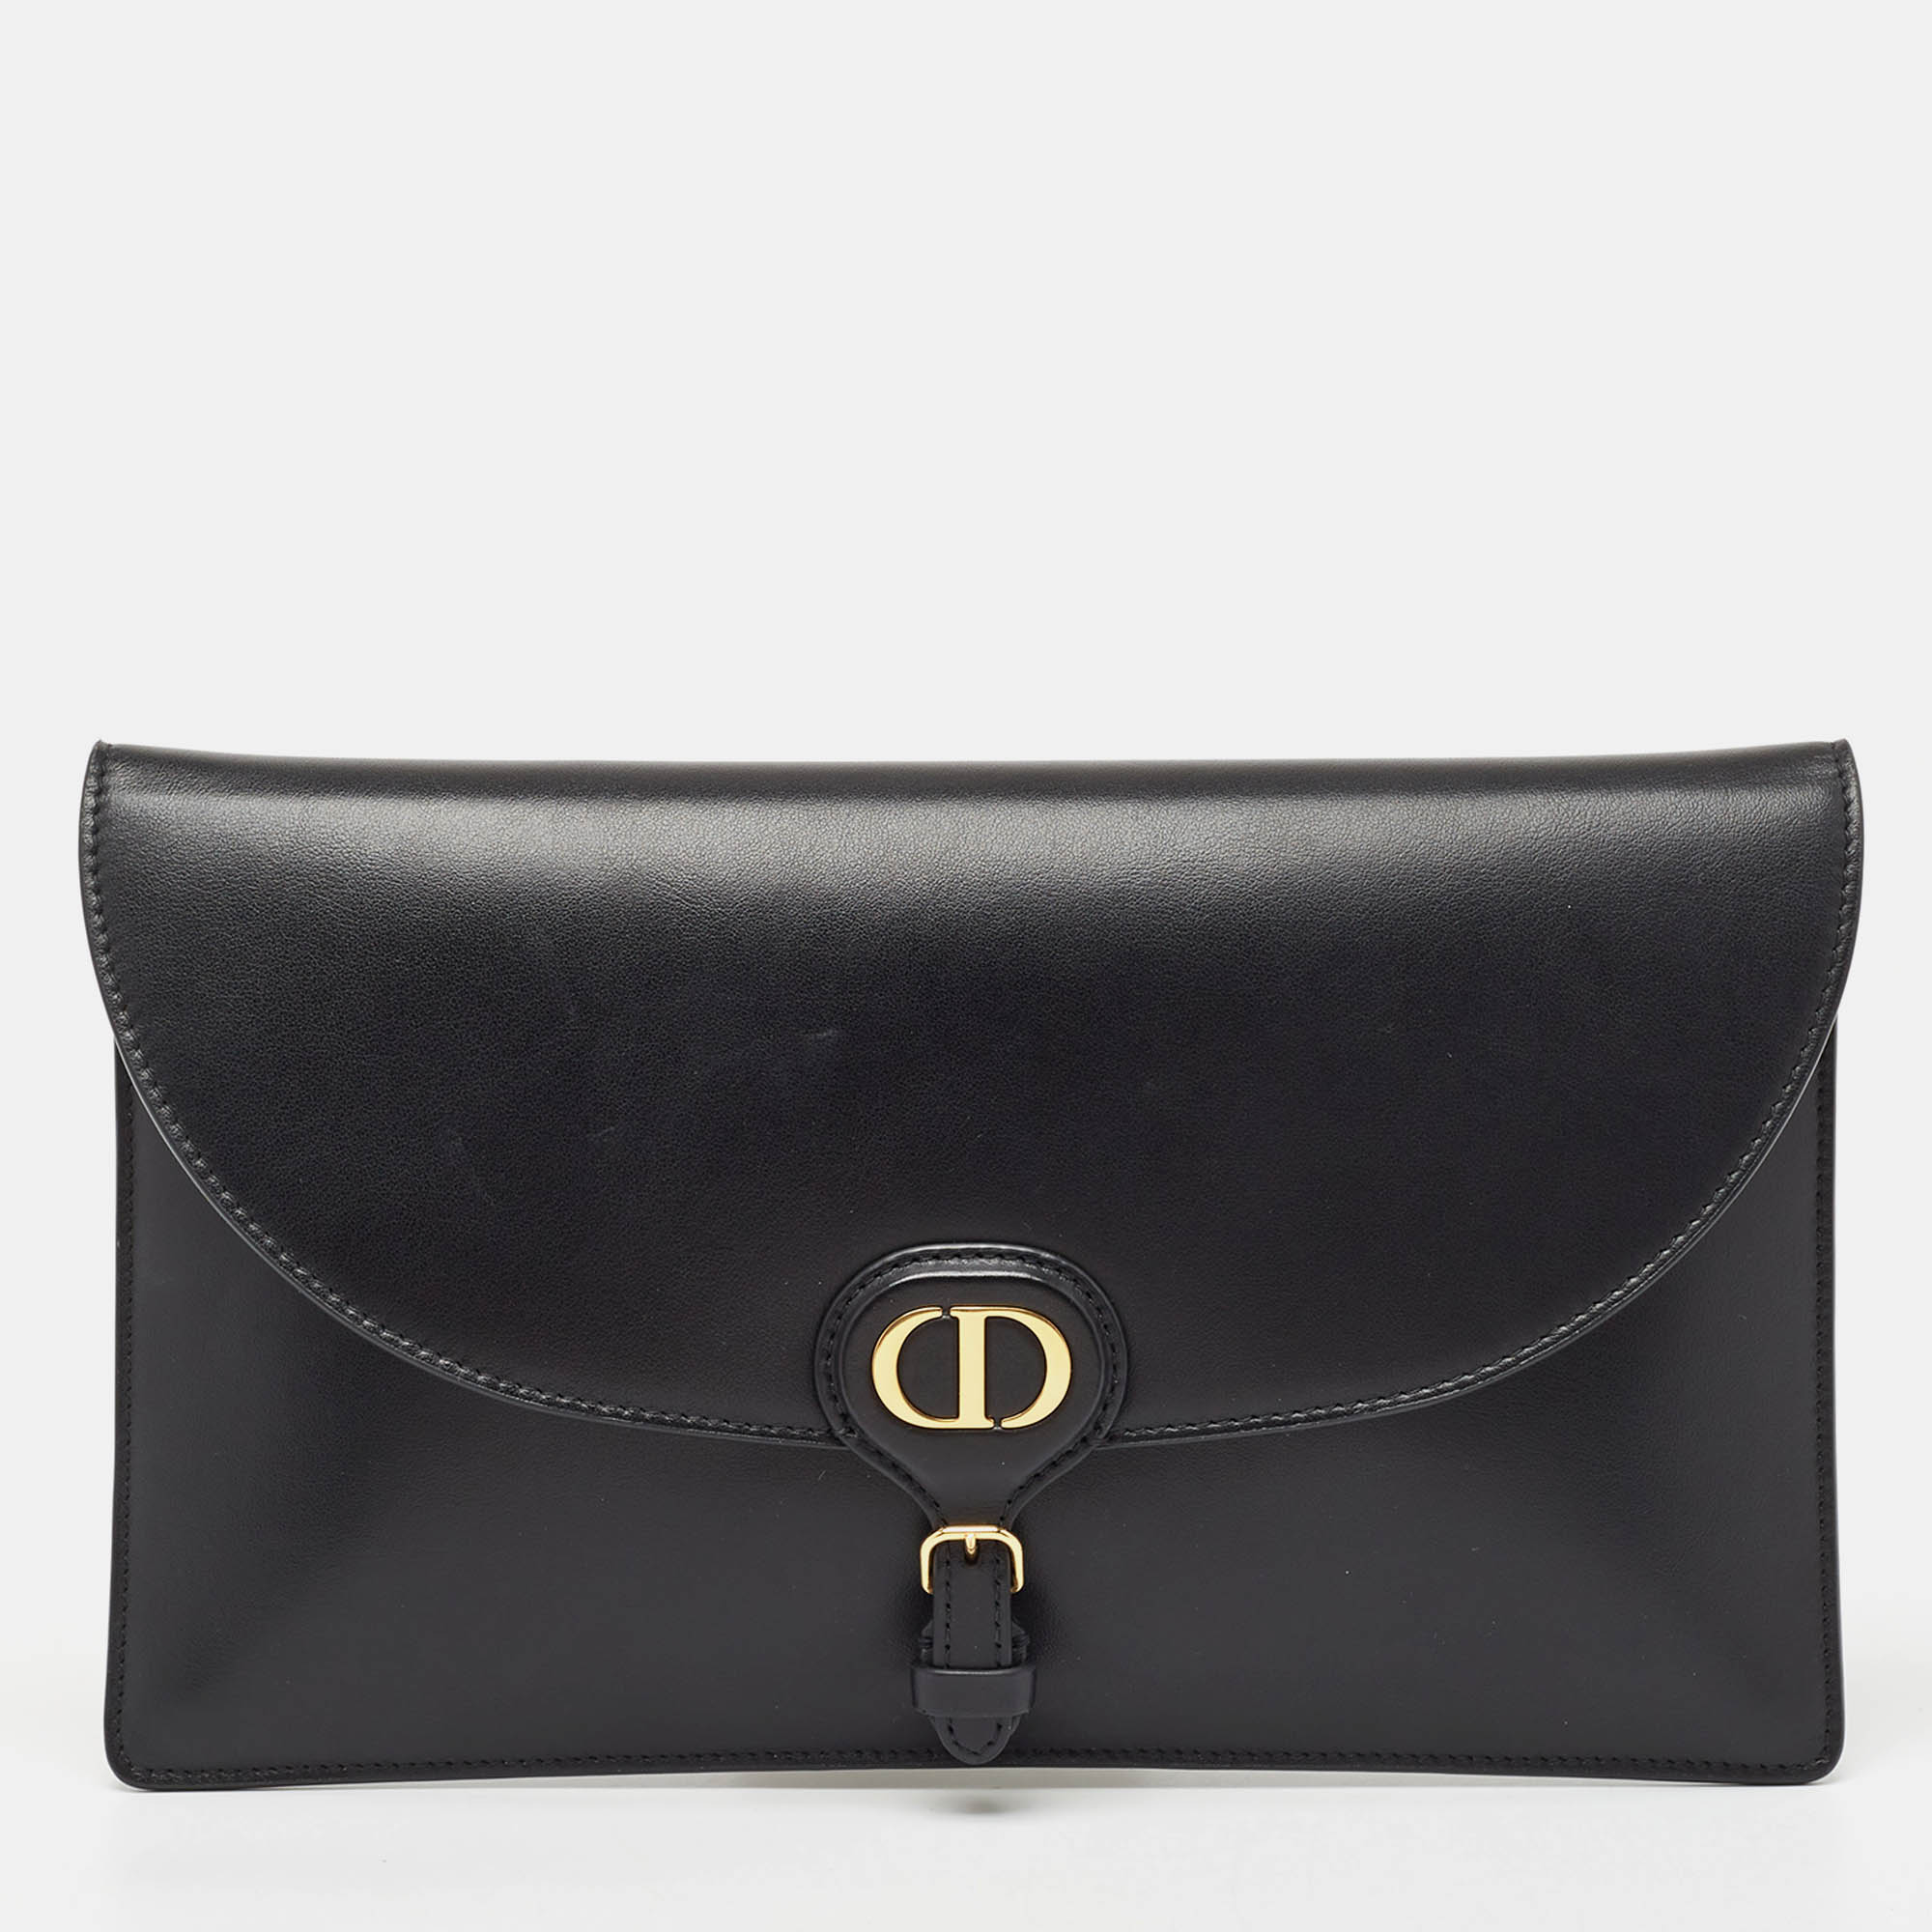 Dior black leather bobby pouch